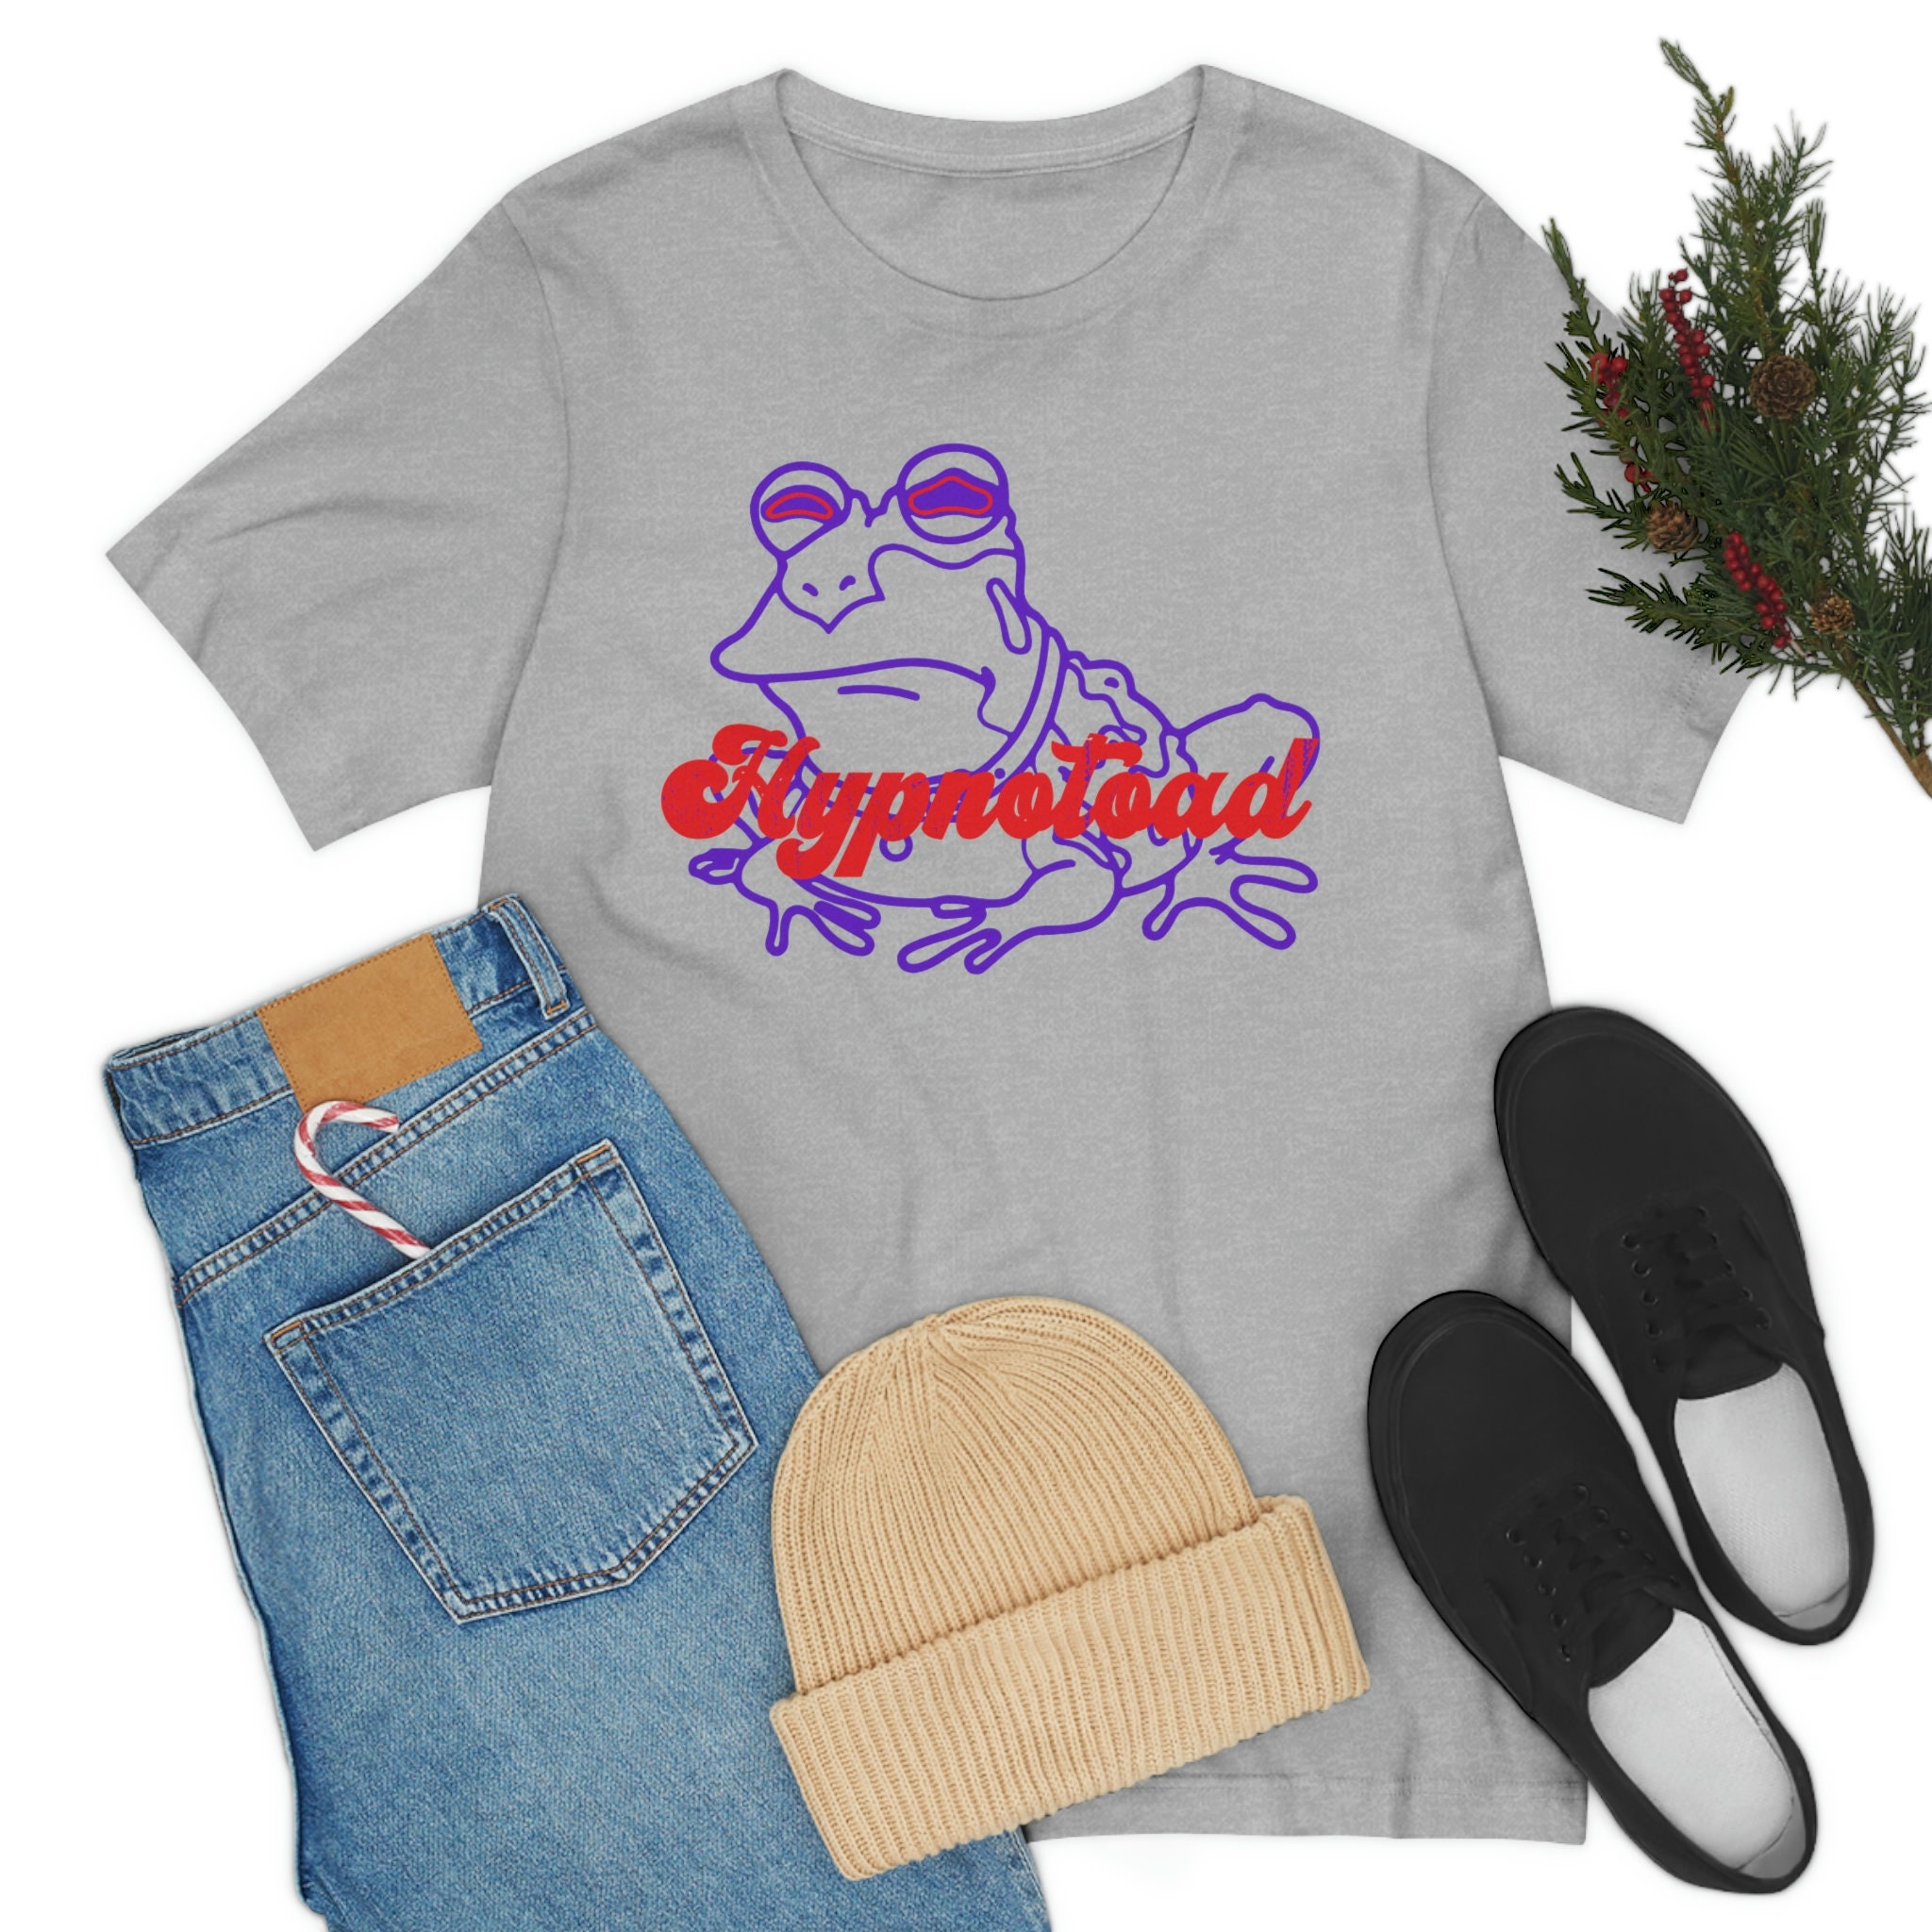 Hypnotoad Funny Frog Tee, Frogs Hypnotoad Tee, Sonny Dykes Frogs ...